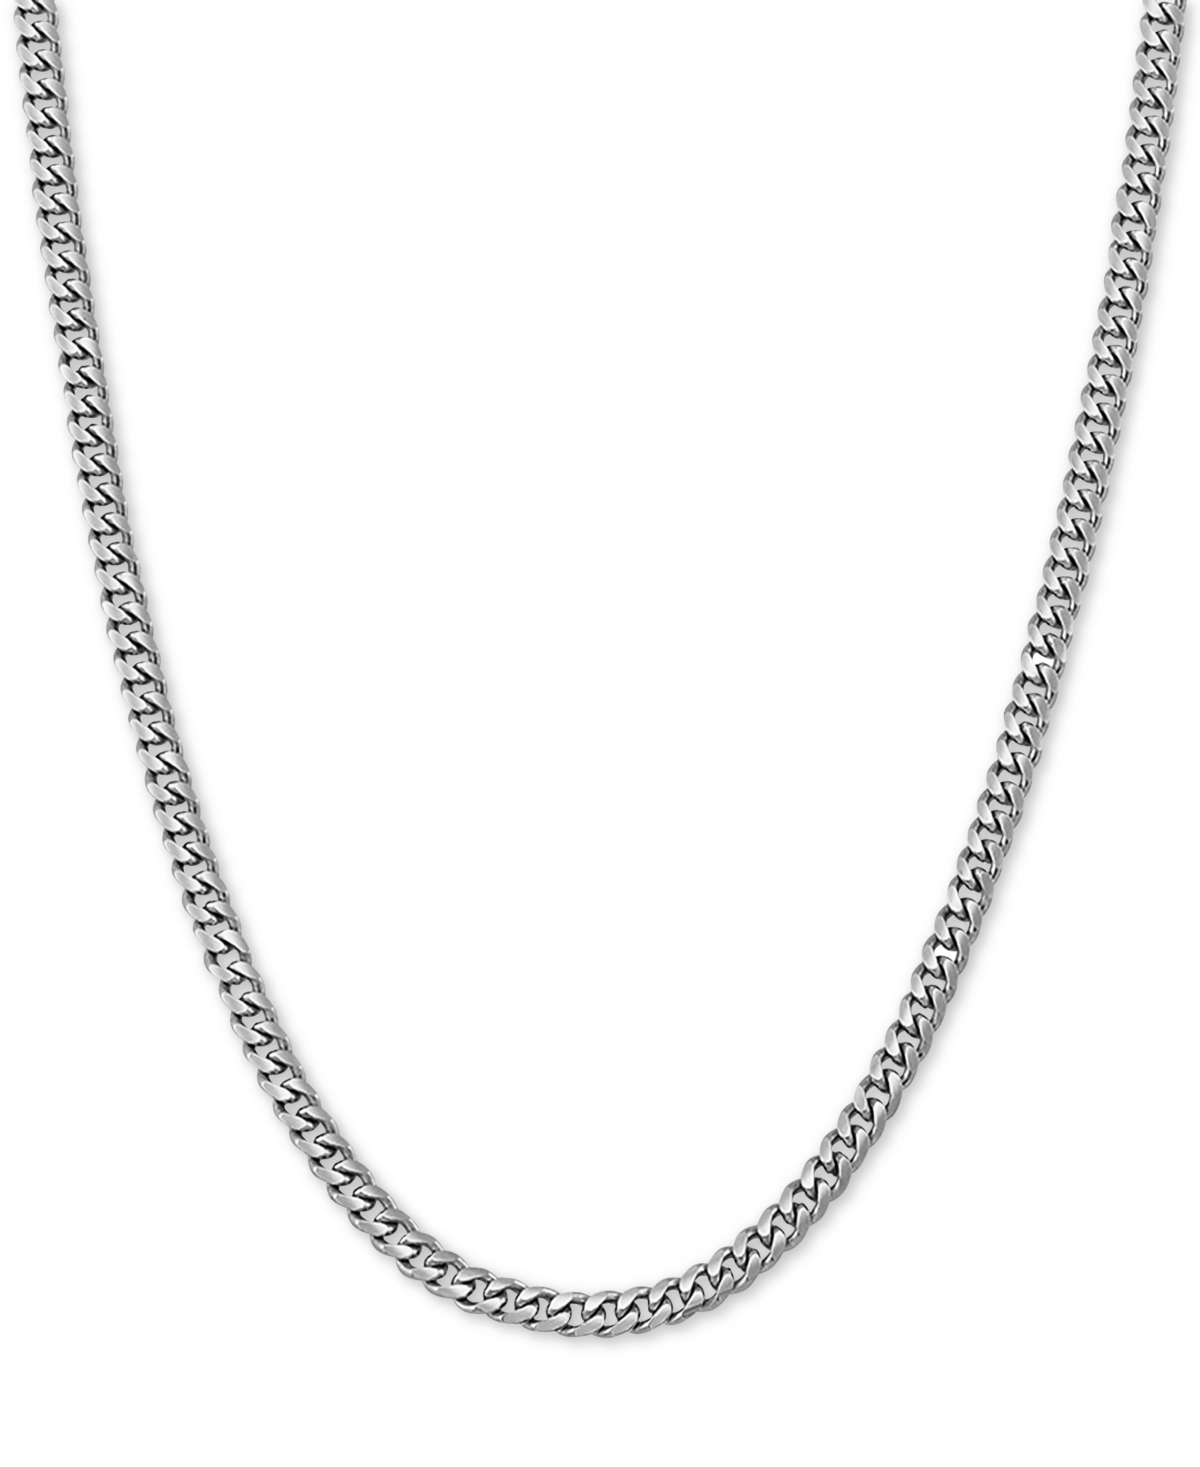 Cuban Link Chain 18" Necklace (2-3/4mm) in Sterling Silver - Silver